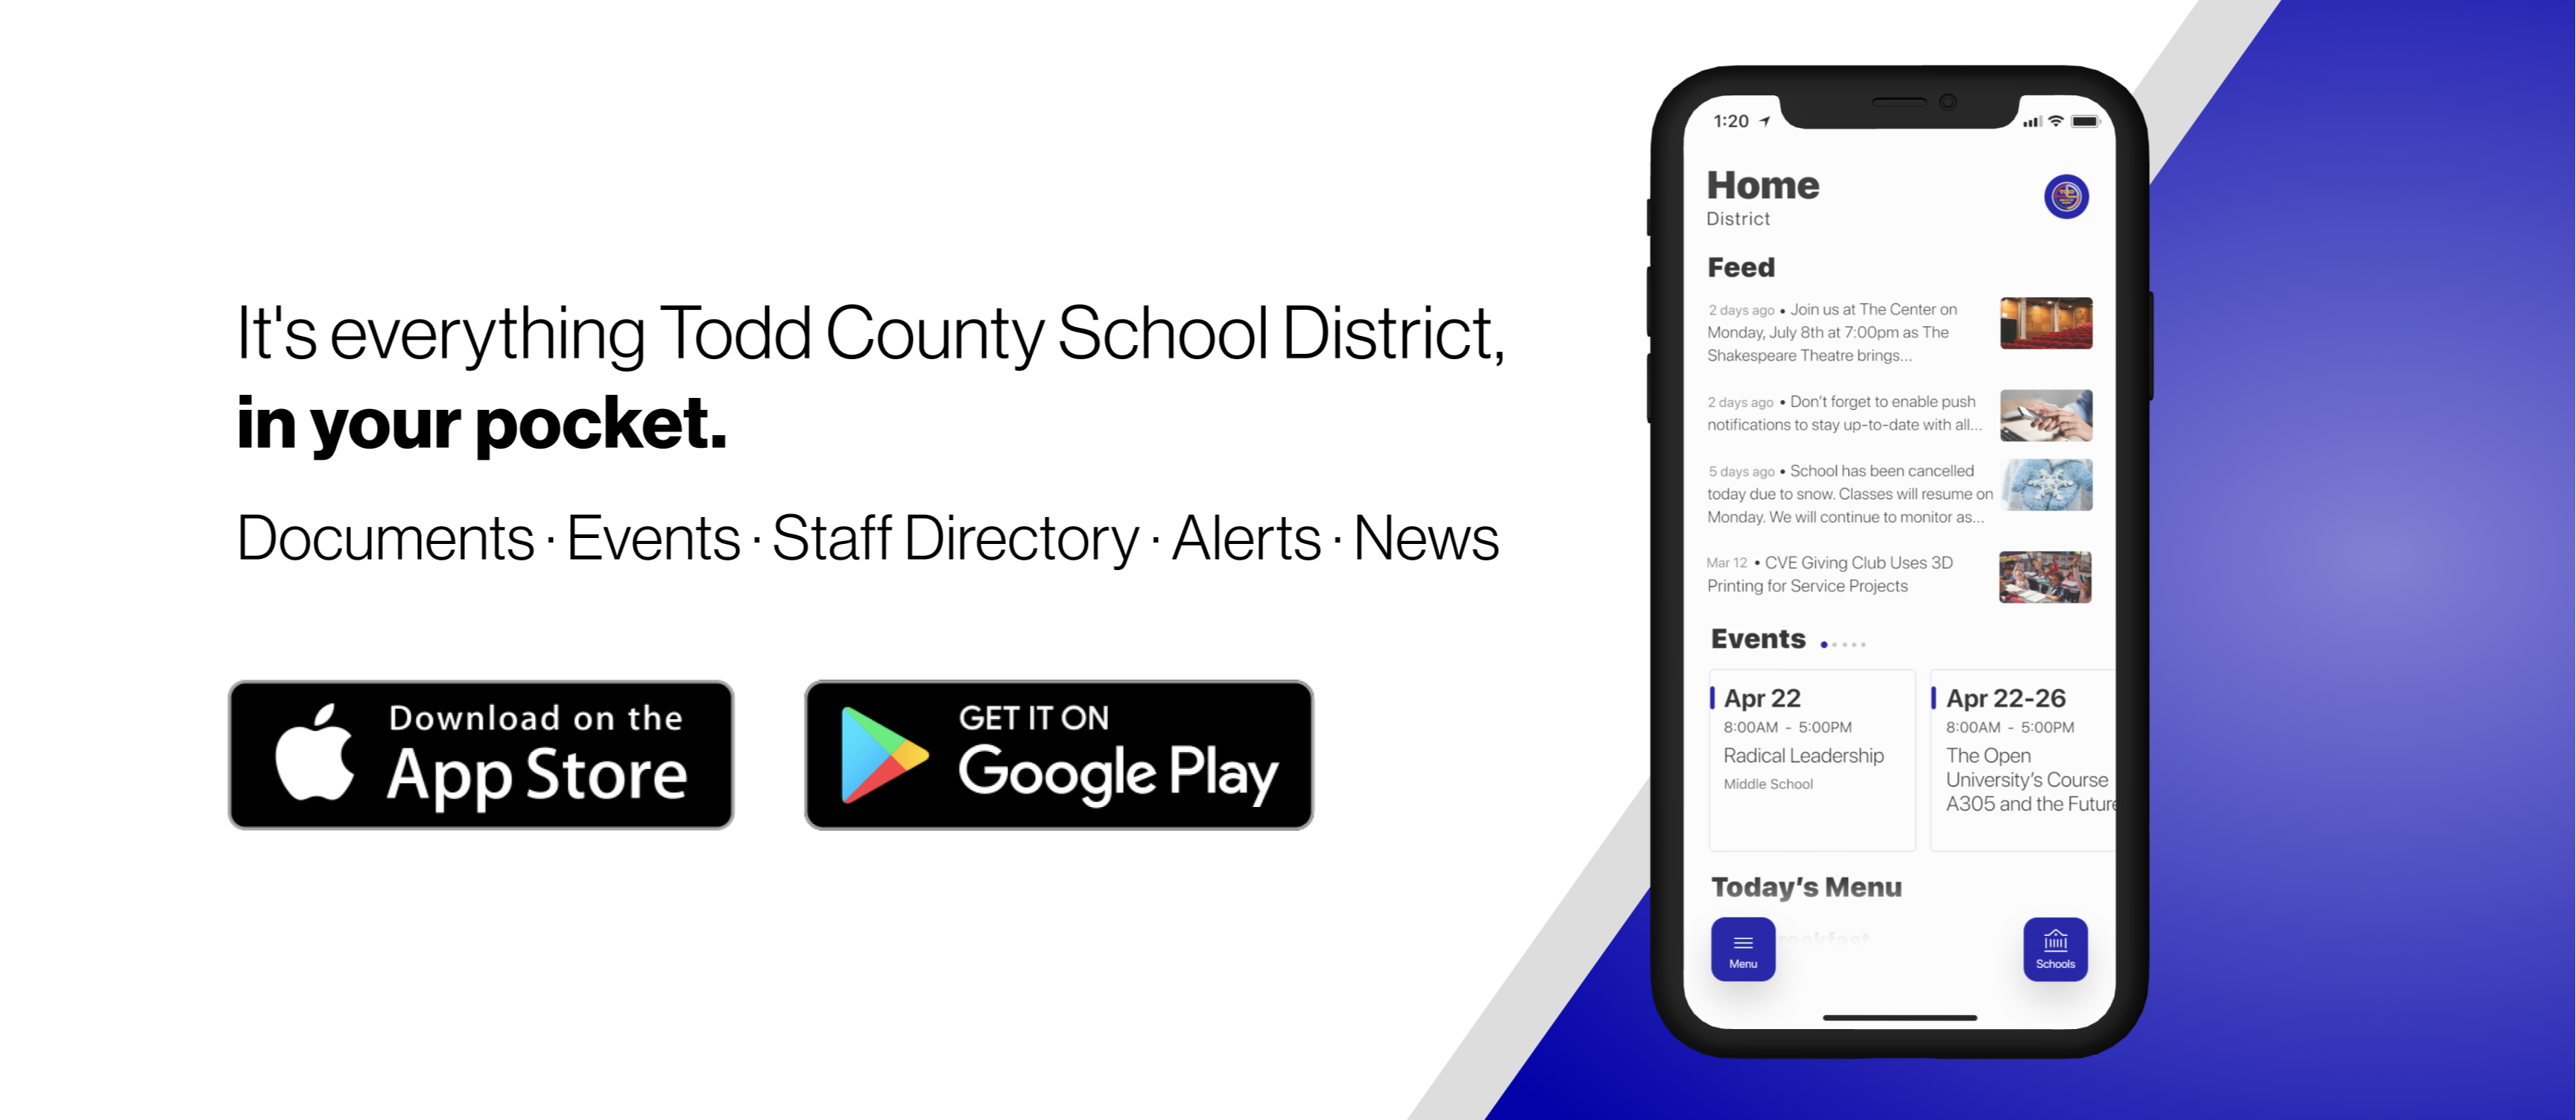 "it's everything Todd County School District in your pocket. Documents, events, staff directory, alerts, news (image of open app)